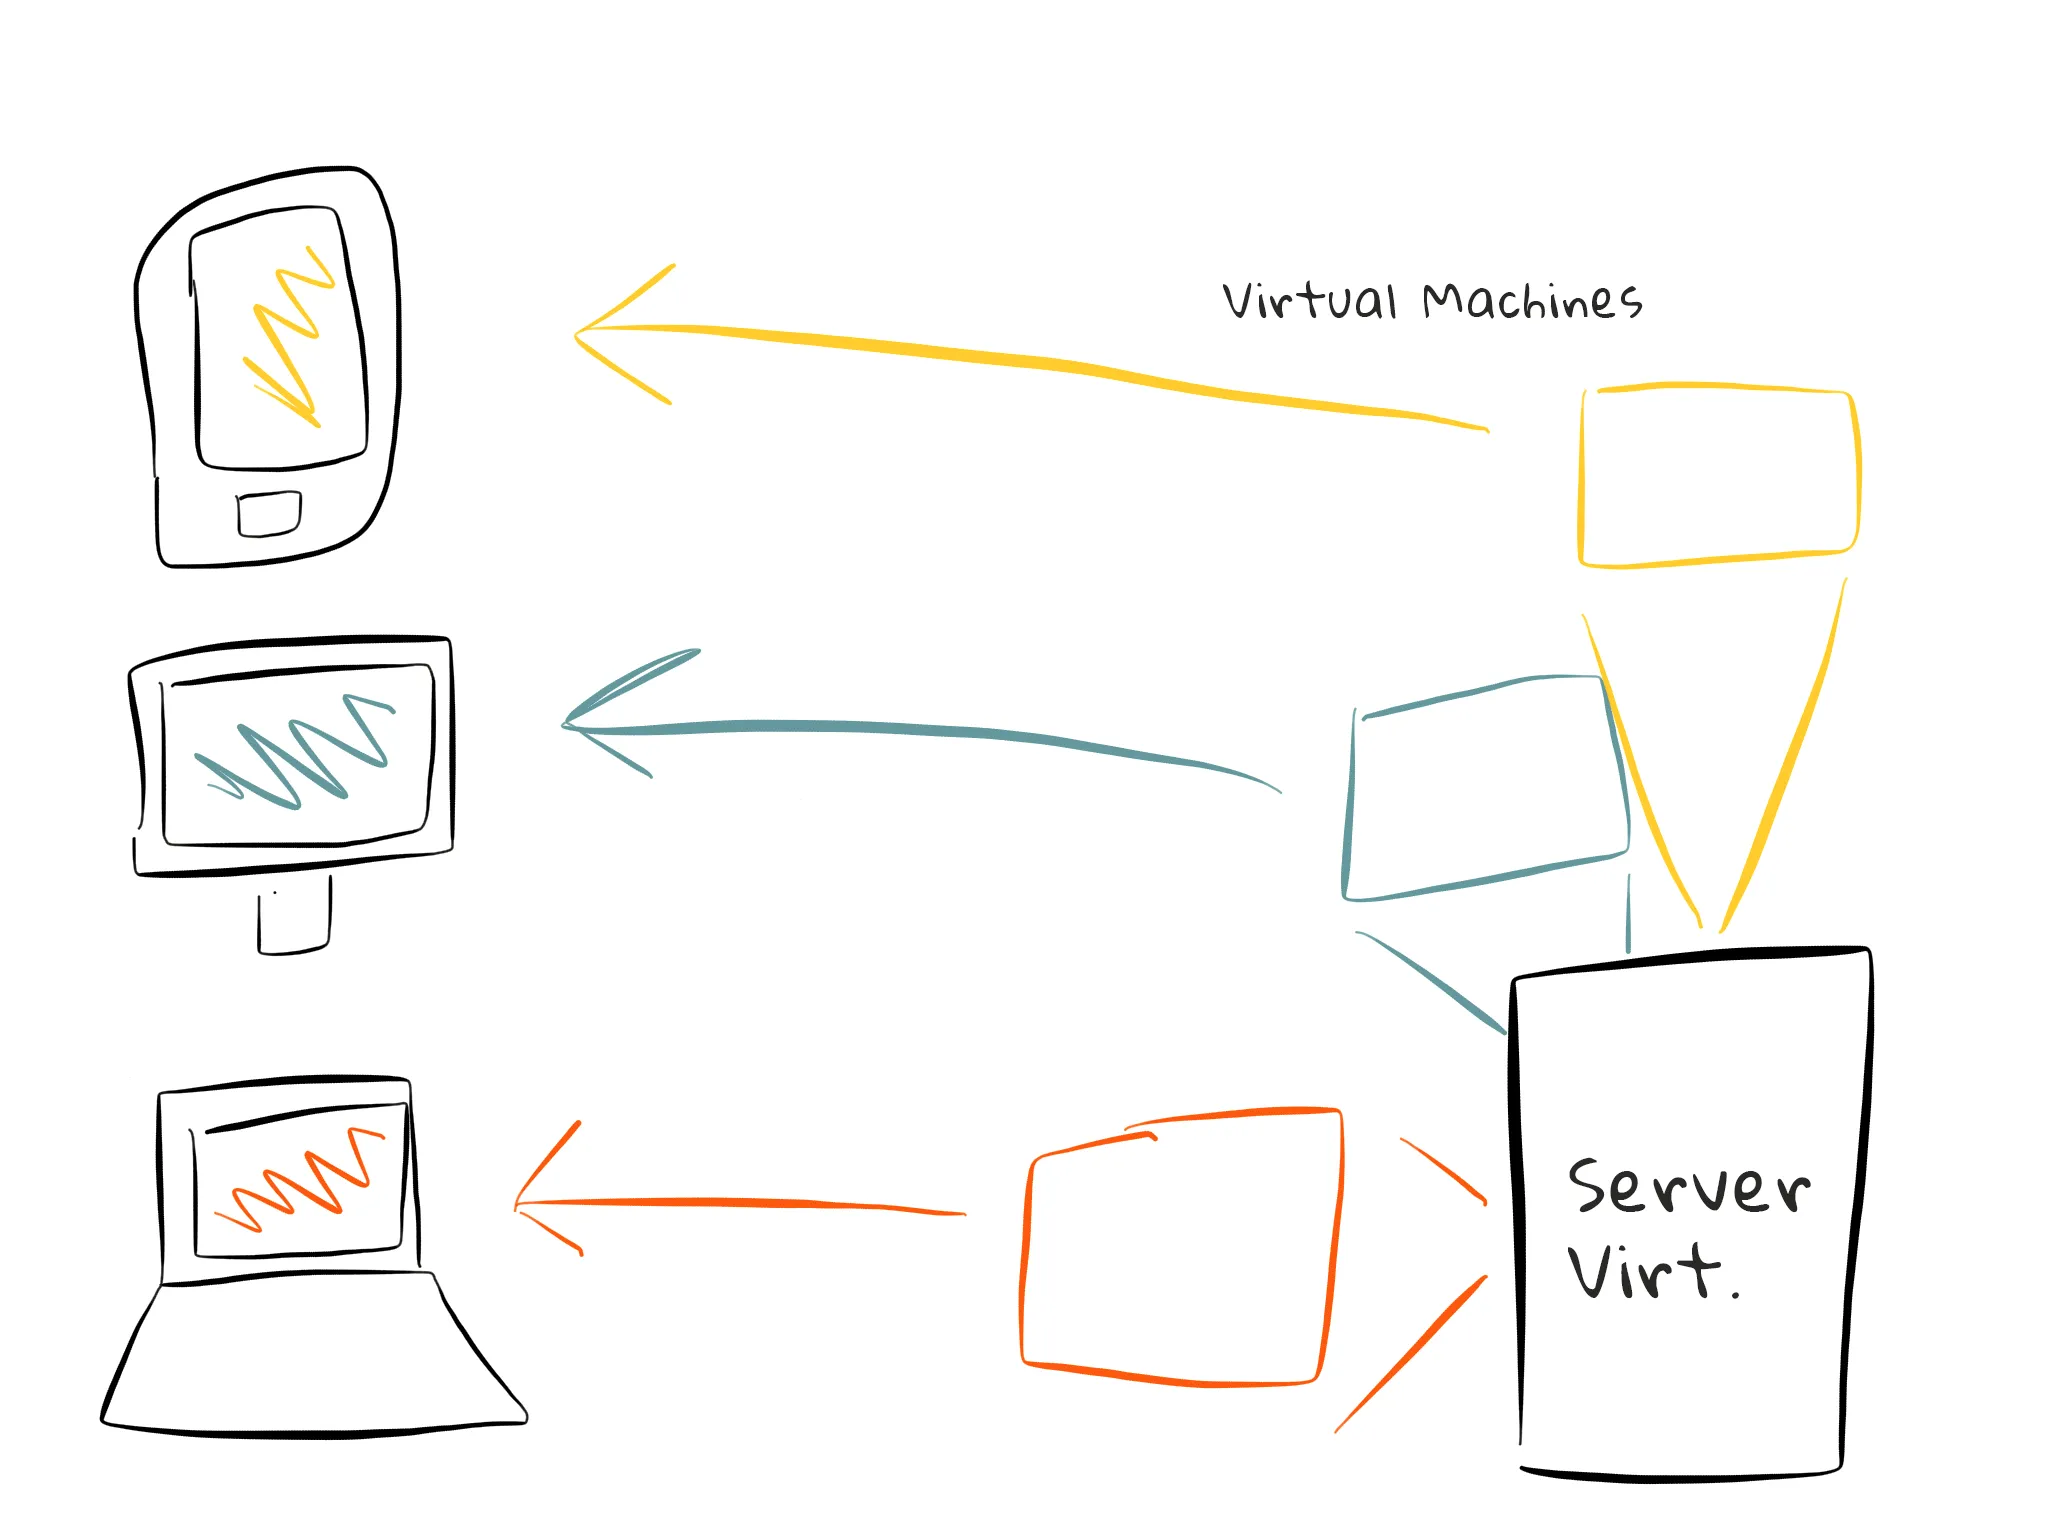 How Virtualization works